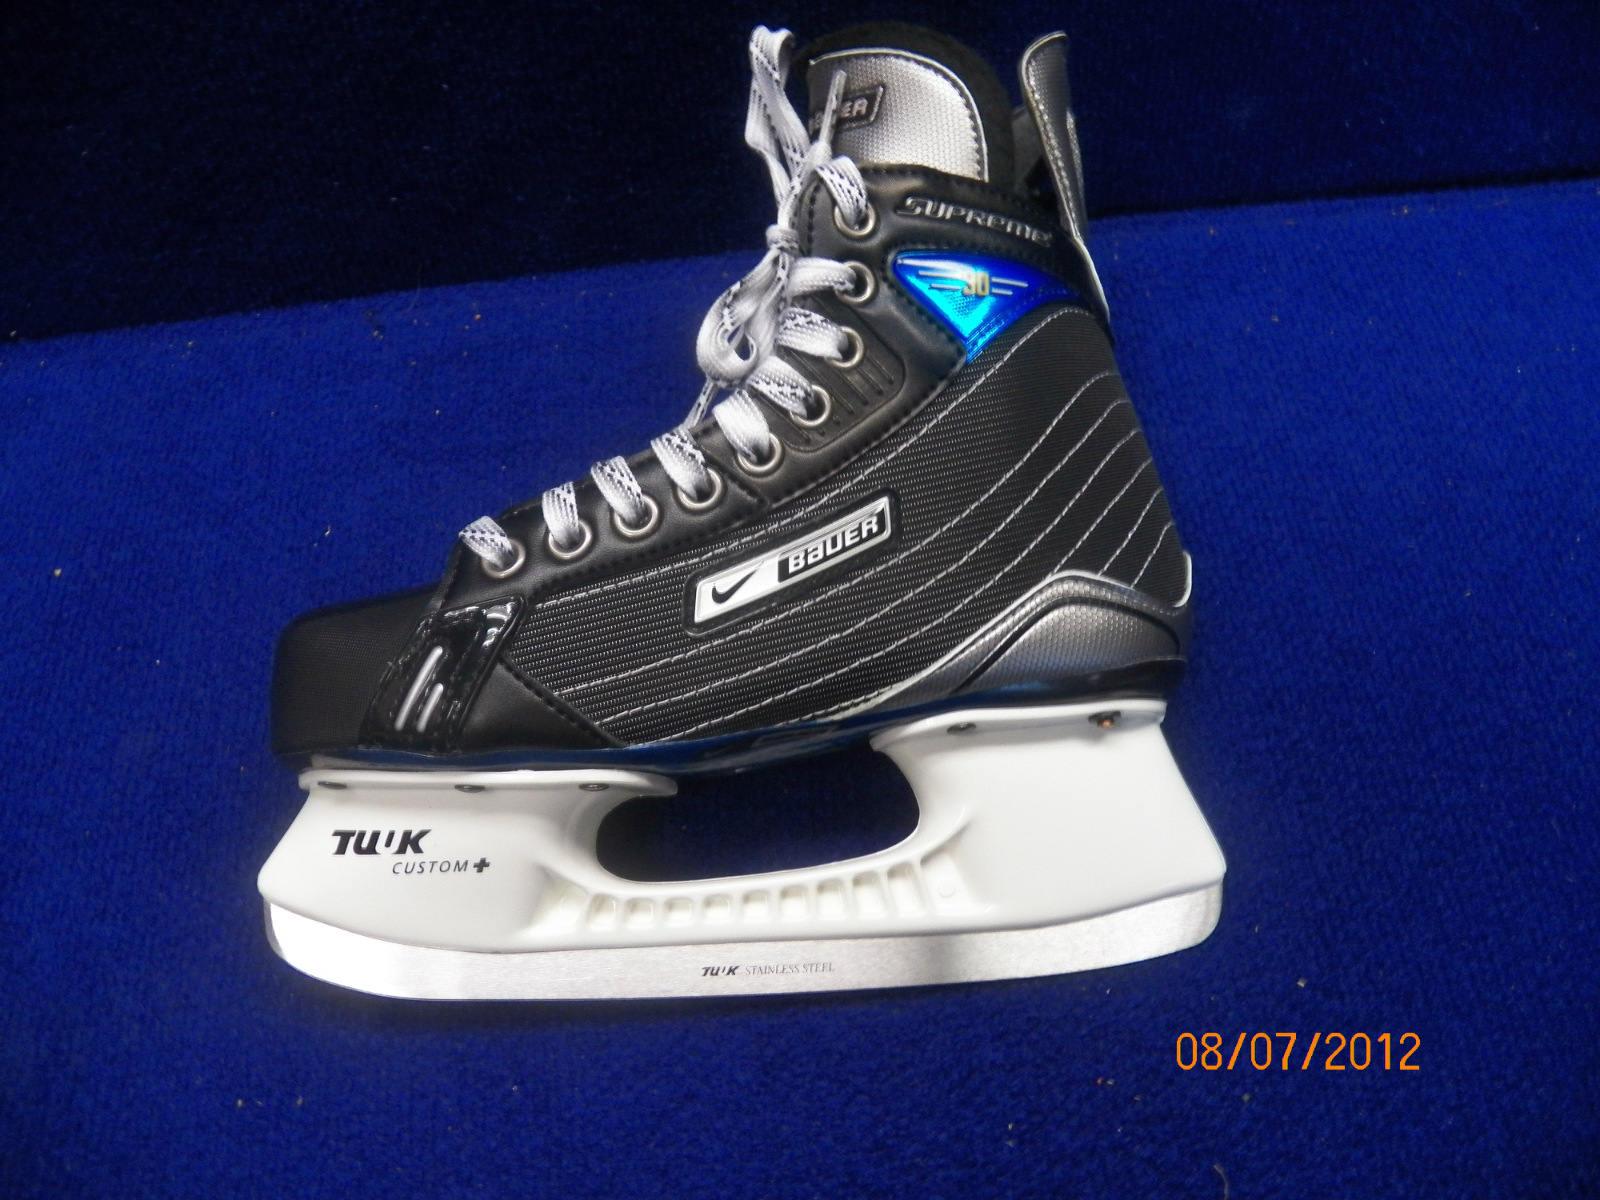 Download Nike Bauer Supreme 30 Ice hockey skates, The Corporal's Crease